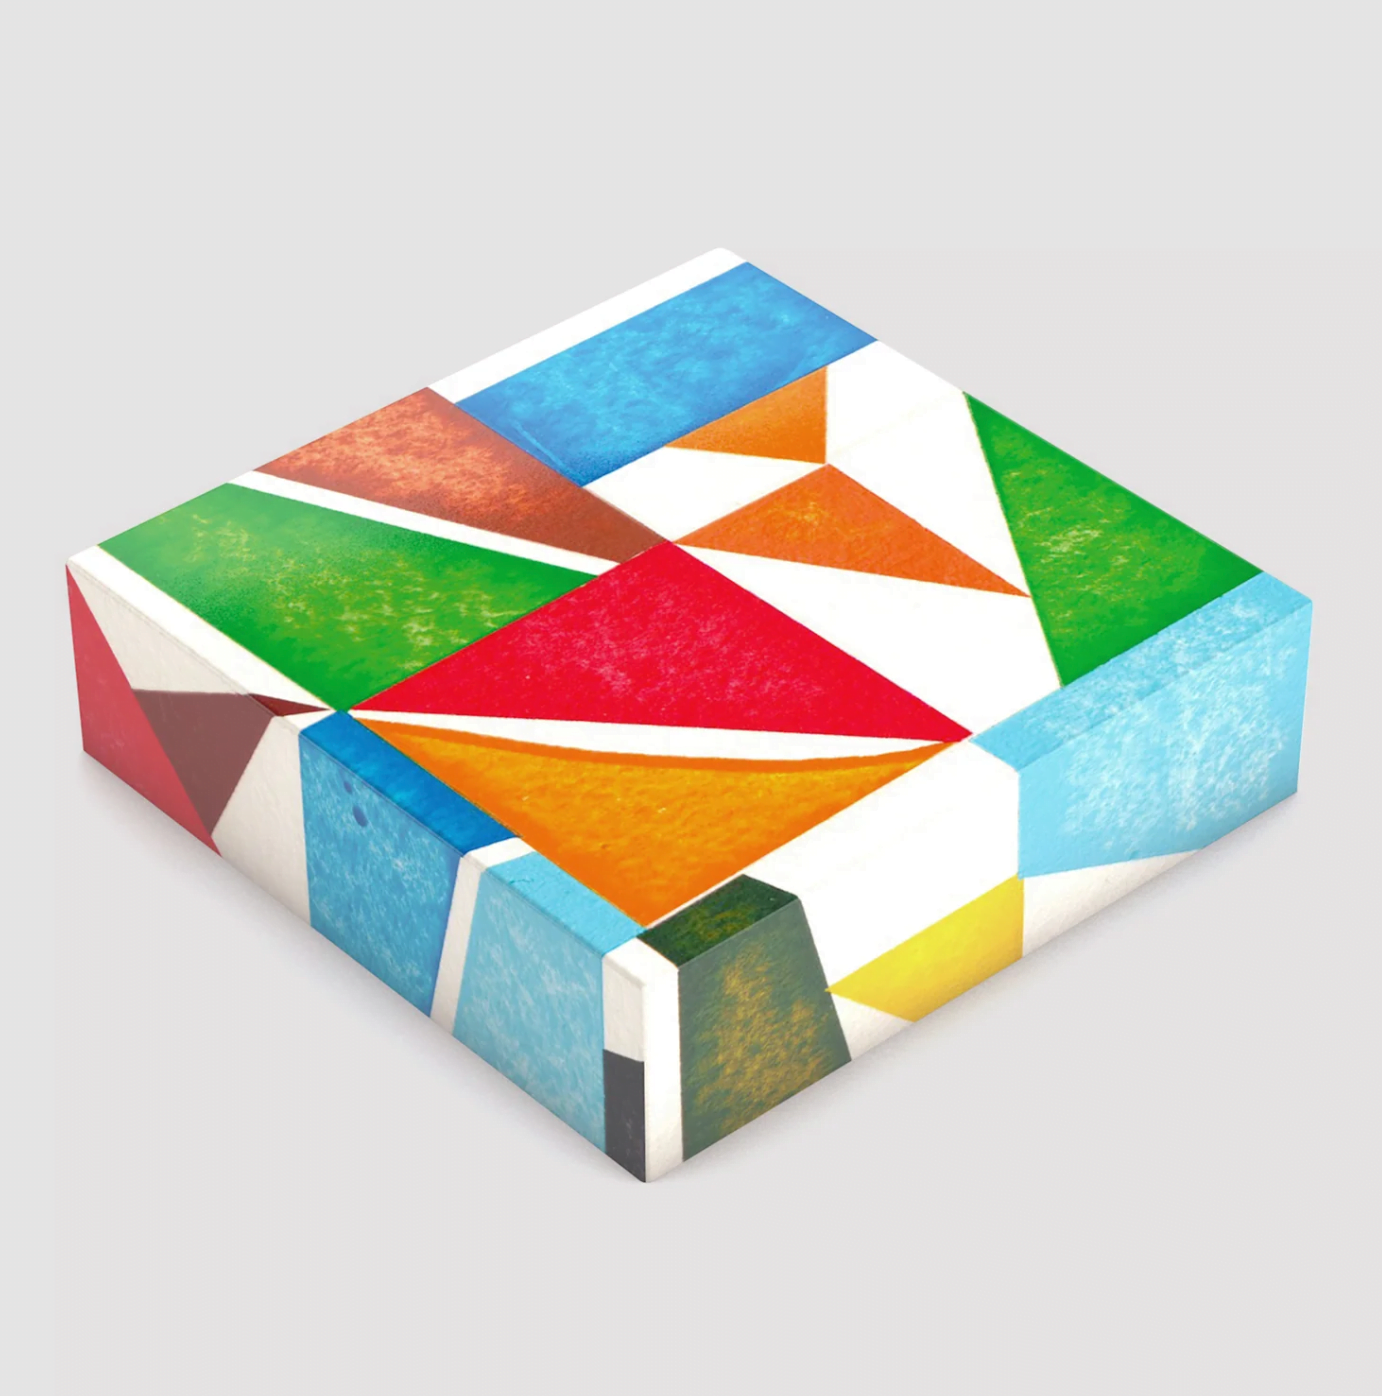 Printed jigsaw puzzle, made in France, with colourful geometric shapes